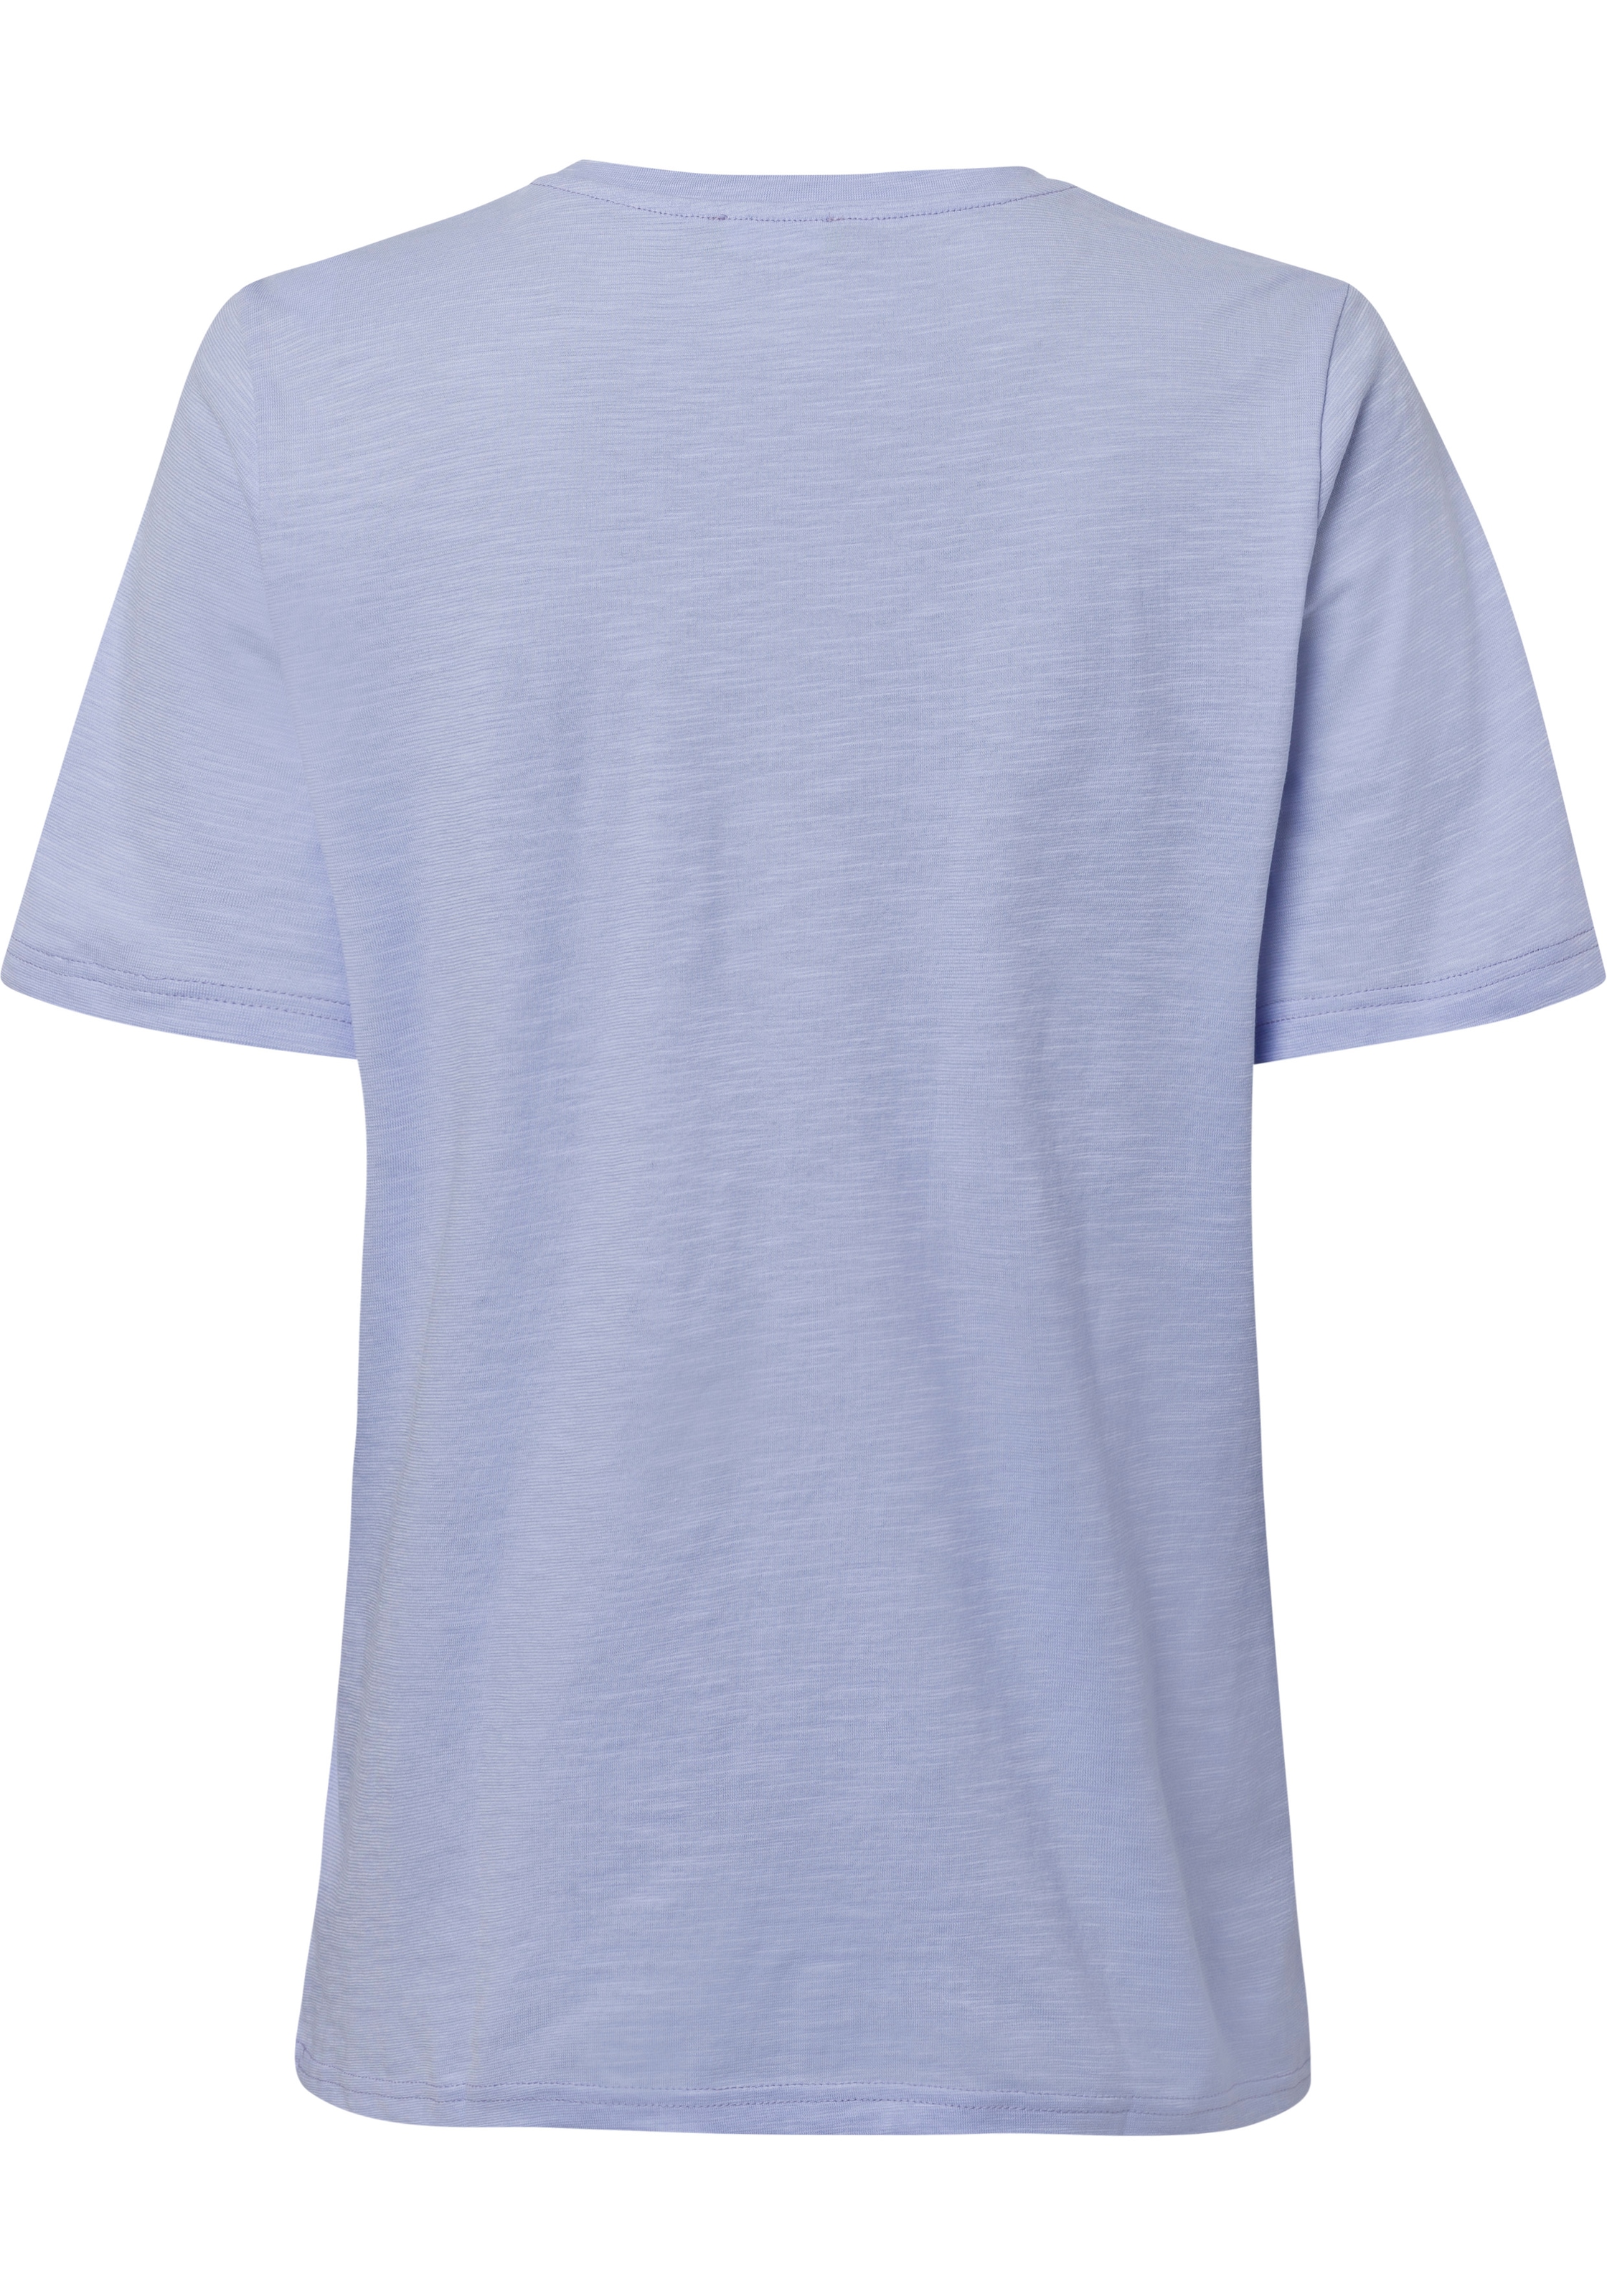 United Colors of Benetton bei in cleaner Basic-Optik T-Shirt, ♕